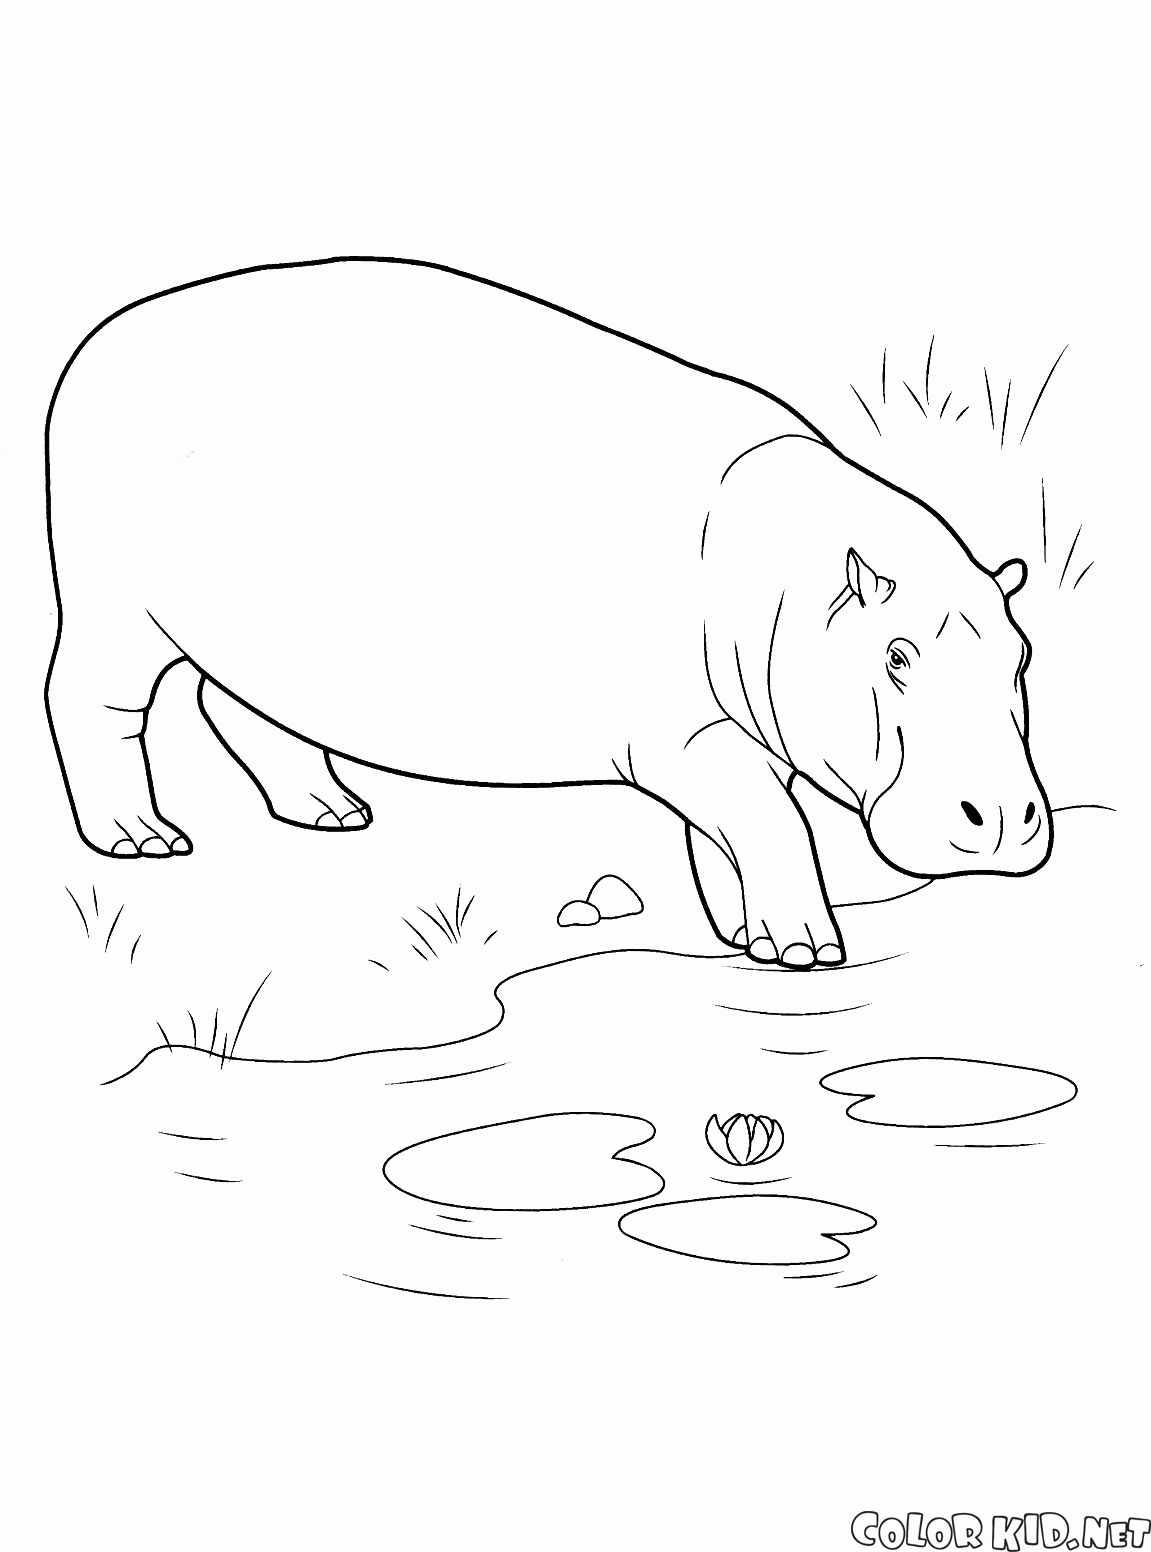 Hippo goes into the body of water